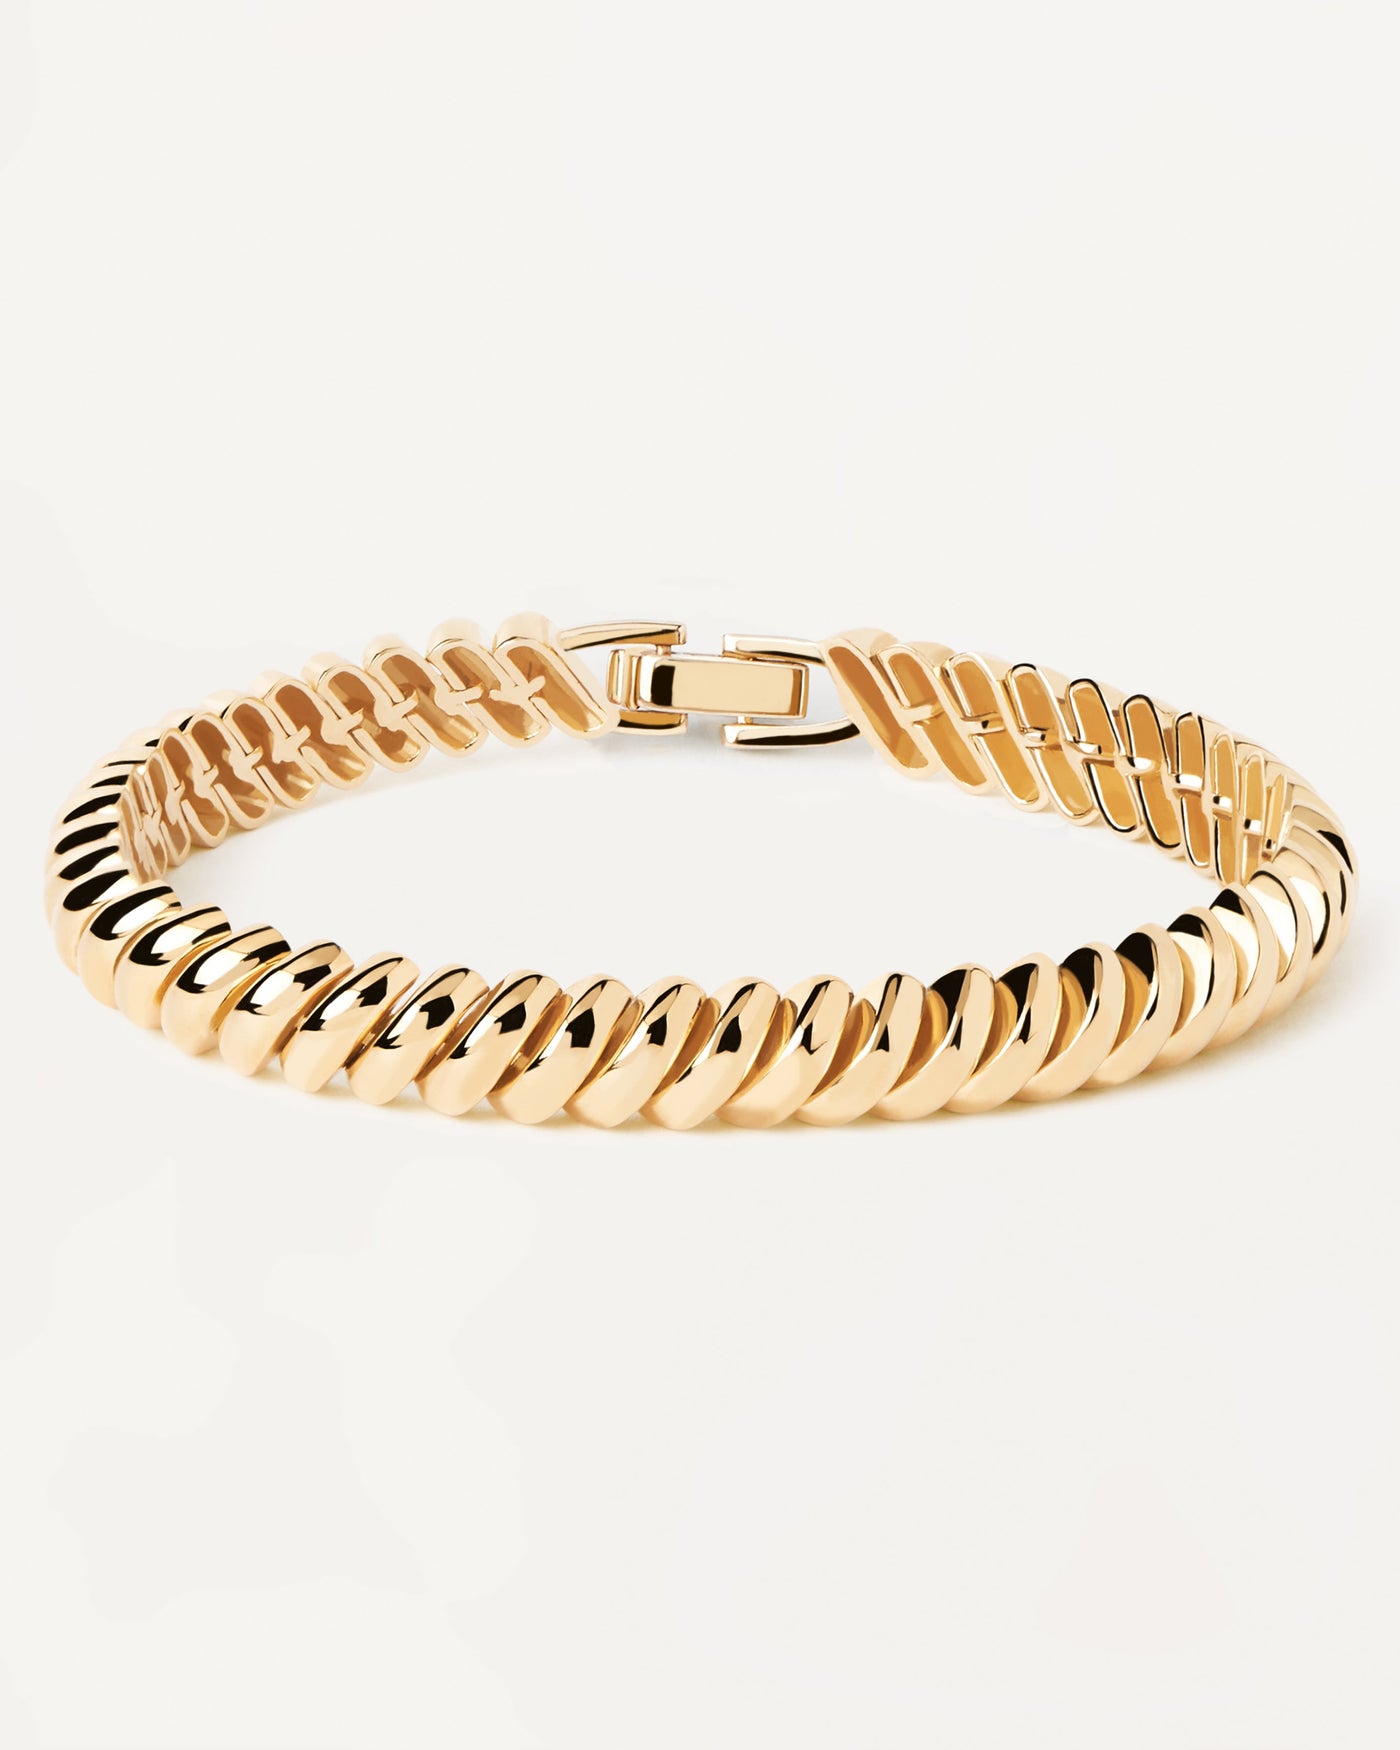 2023 Selection | Gaia Bracelet. Gold-plated silver chain bracelet with San Marco links. Get the latest arrival from PDPAOLA. Place your order safely and get this Best Seller. Free Shipping.